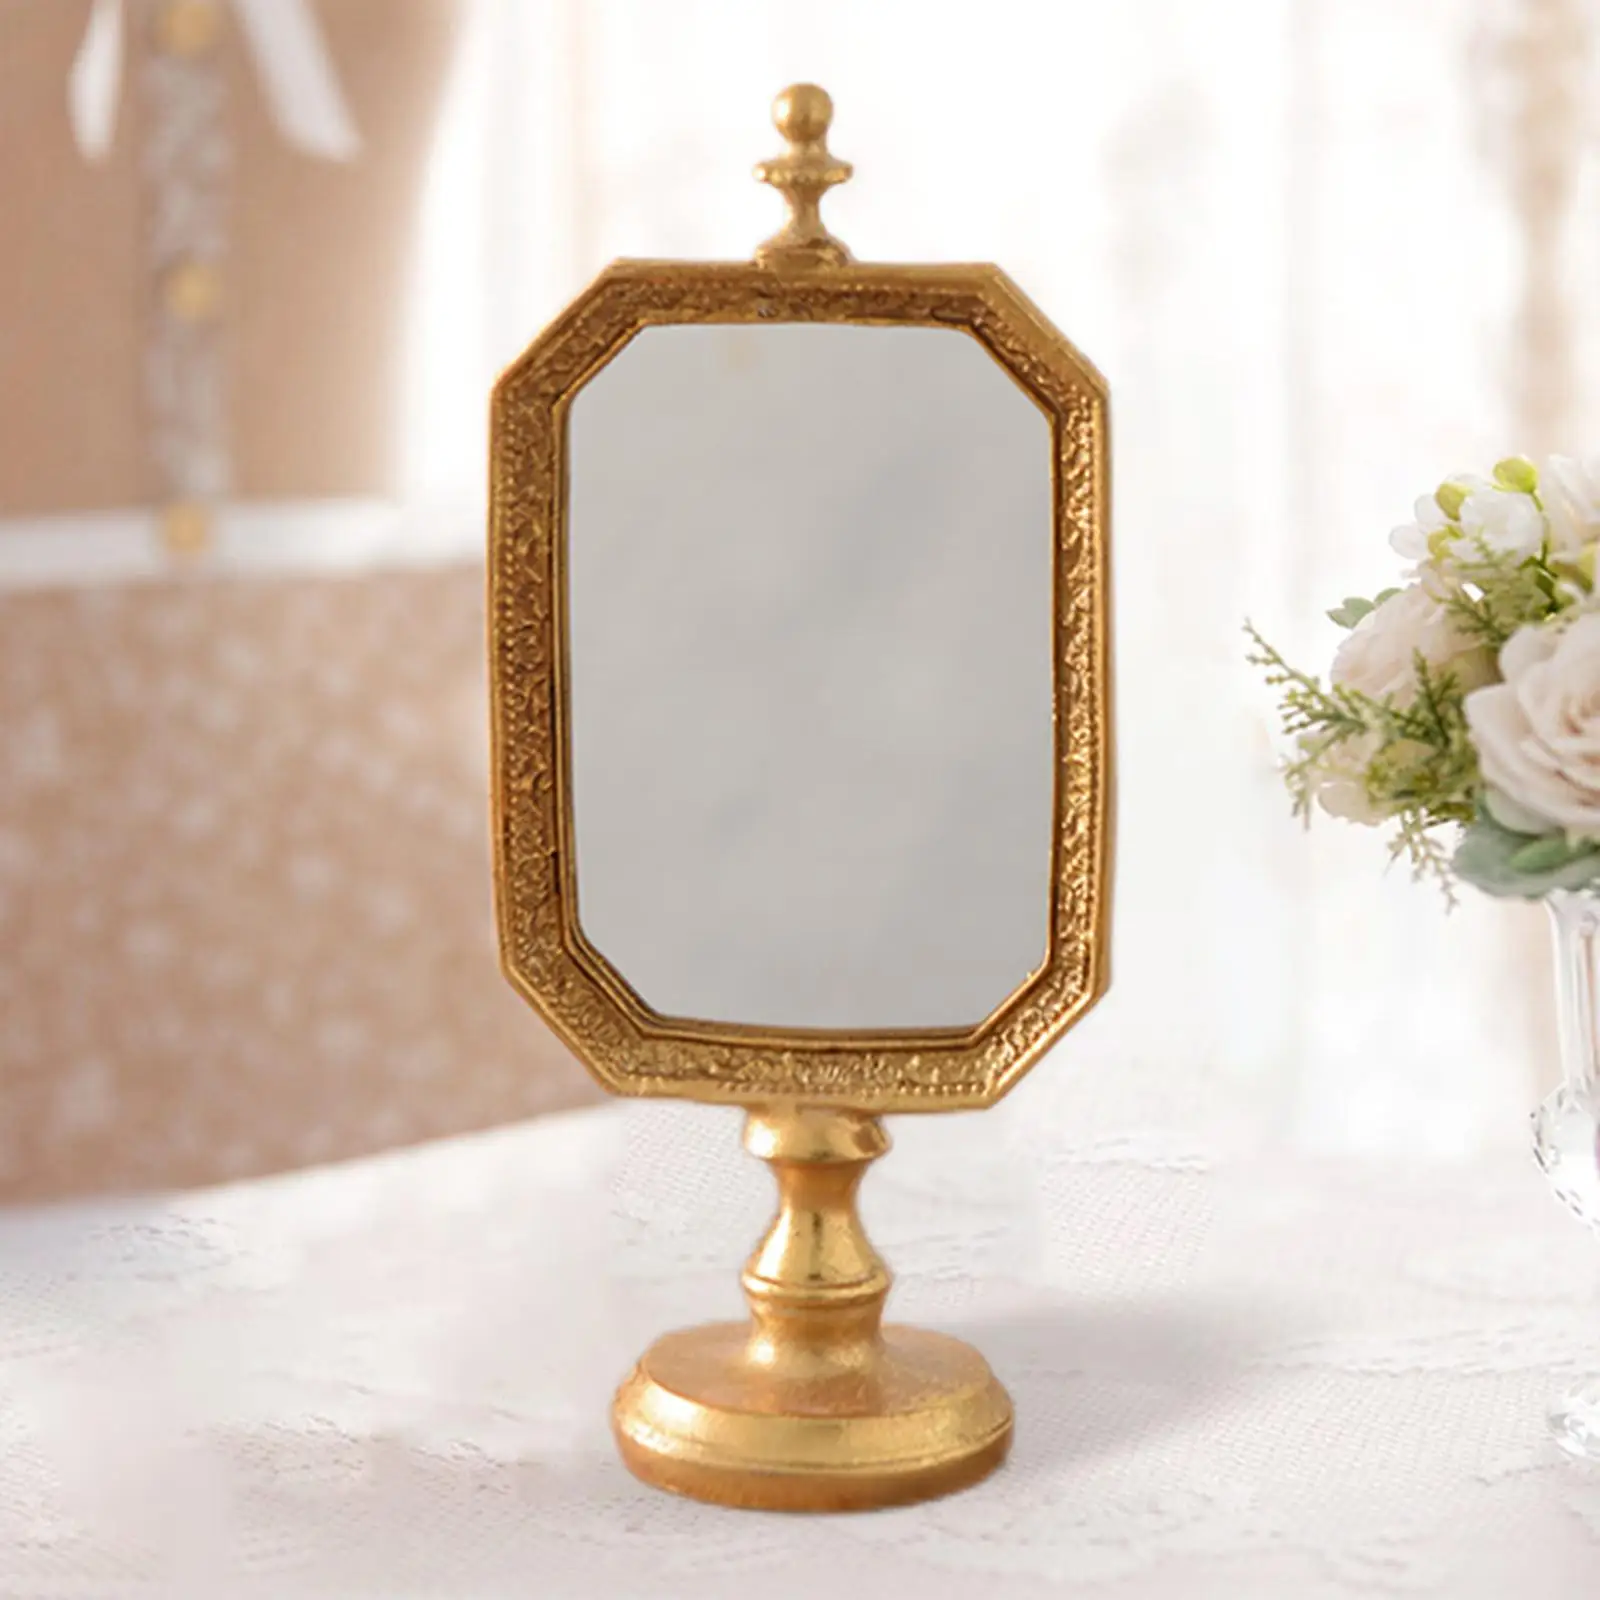 Vintage Style Makeup Mirror Tabletop Cosmtic Mirror Decorative  Retro  for Dresser Counter Display Birthday Gift